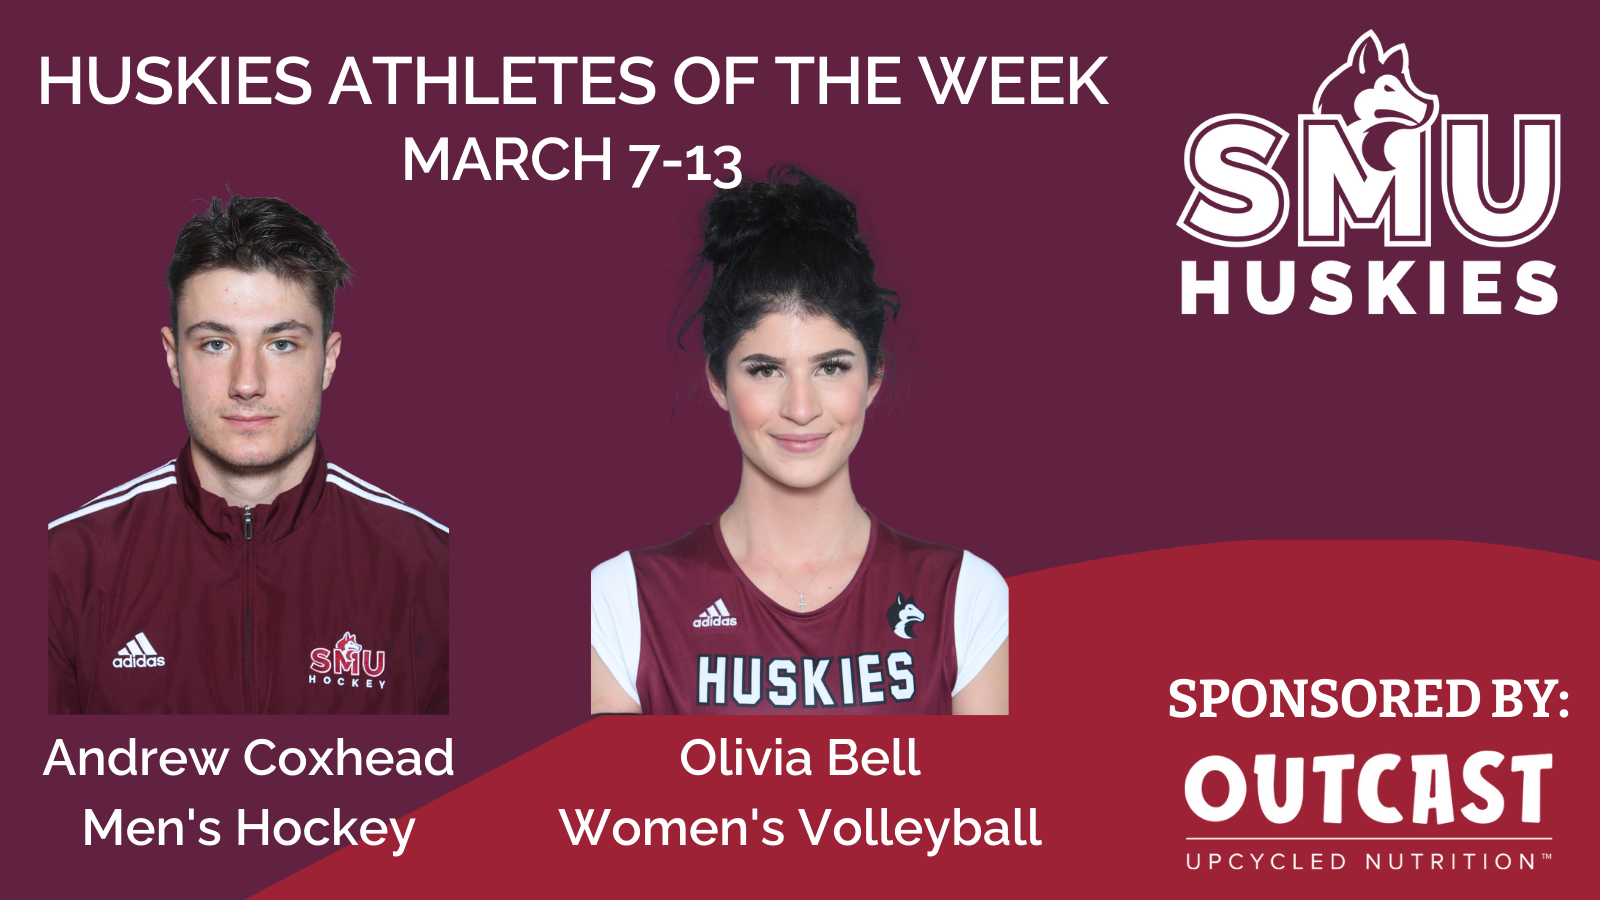 Men's hockey player Andrew Coxhead and women's volleyball player Olivia Bell have been named Huskies Athletes of the Week for the week of March 7-13, sponsored by Outcast Upcycled Nutrition.